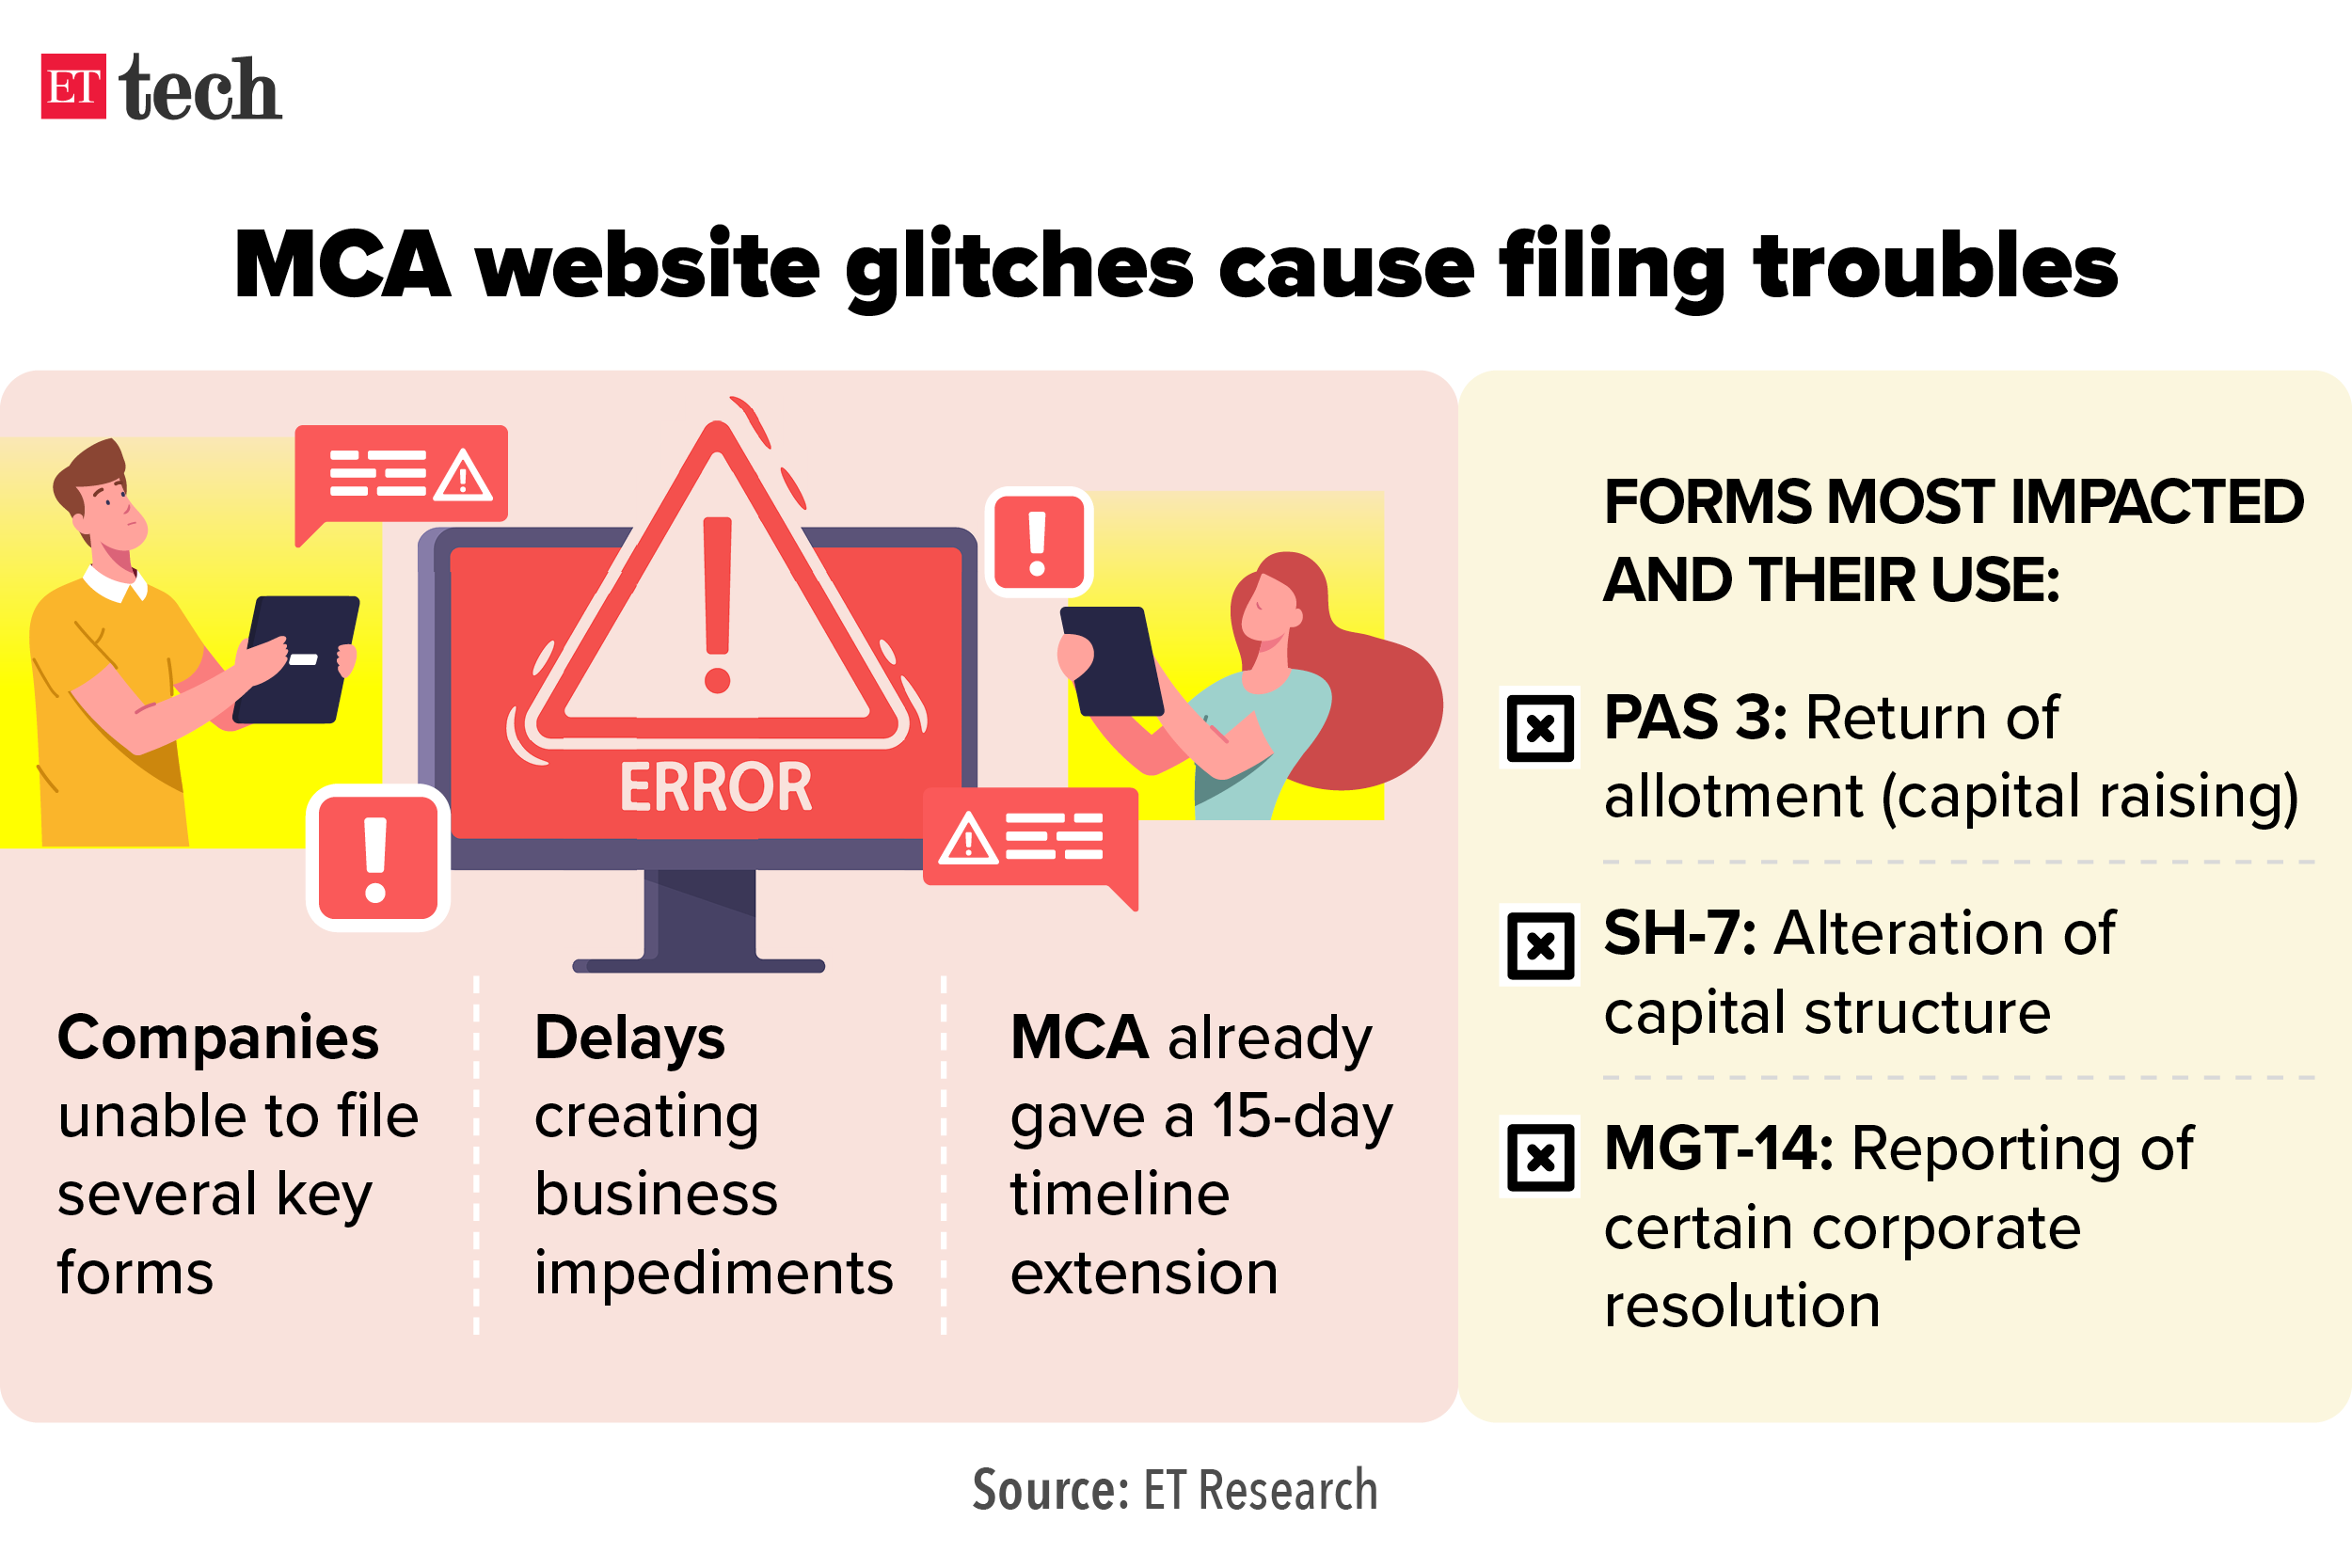 MCA website glitches cause filing troubles